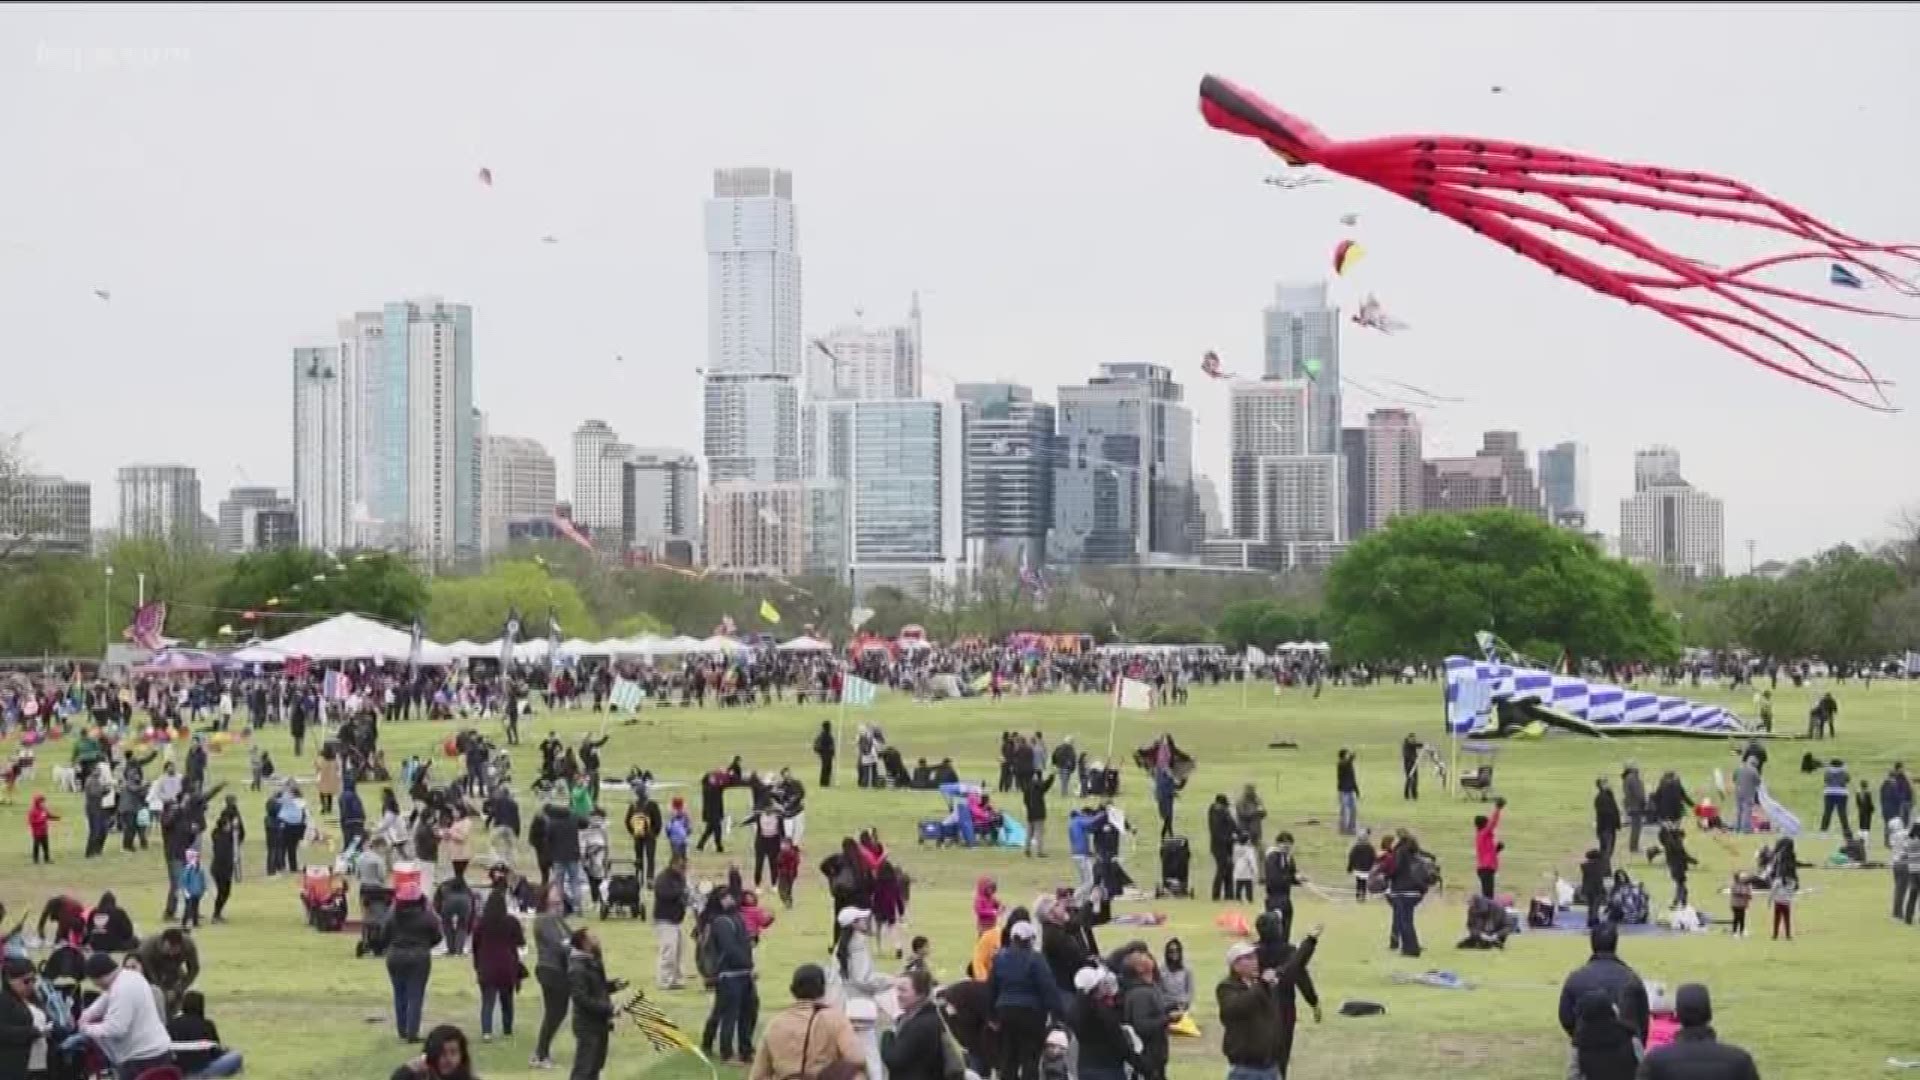 Austin ABC Kite Festival in Zilker Park takes off on cool, cloudy day